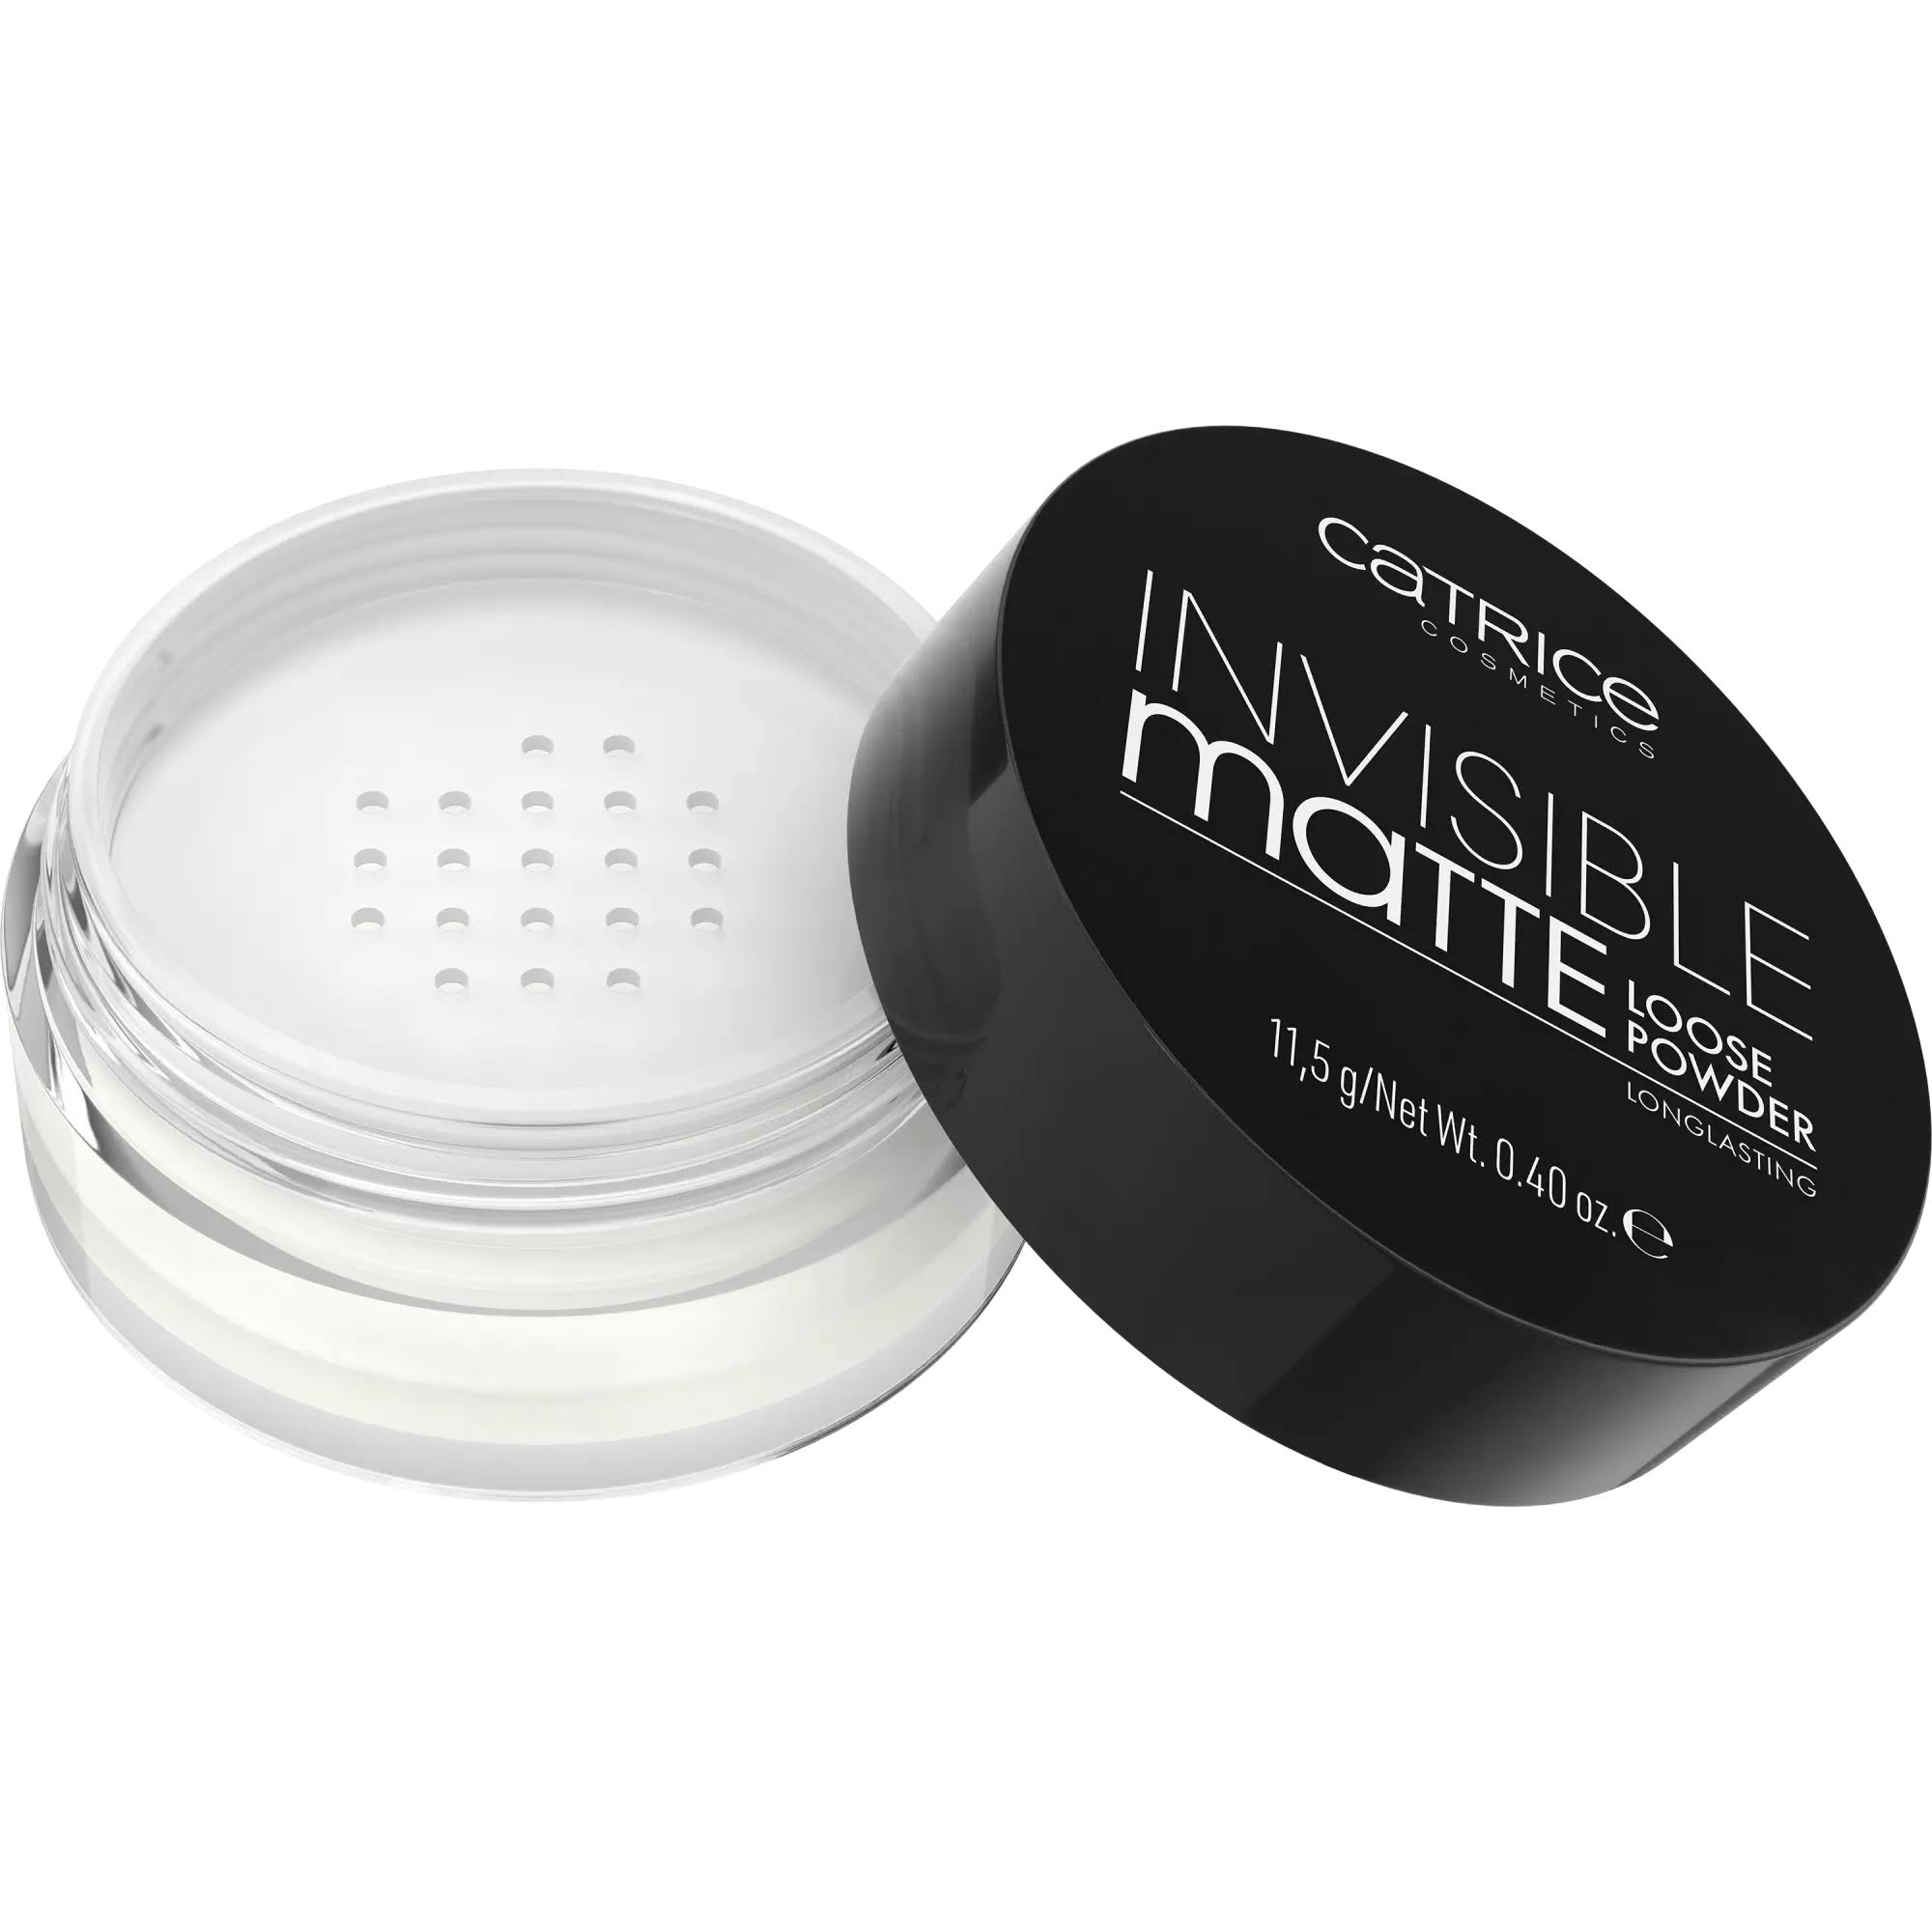 Catrice Invisible Matte Loose Powder 001 11.5g